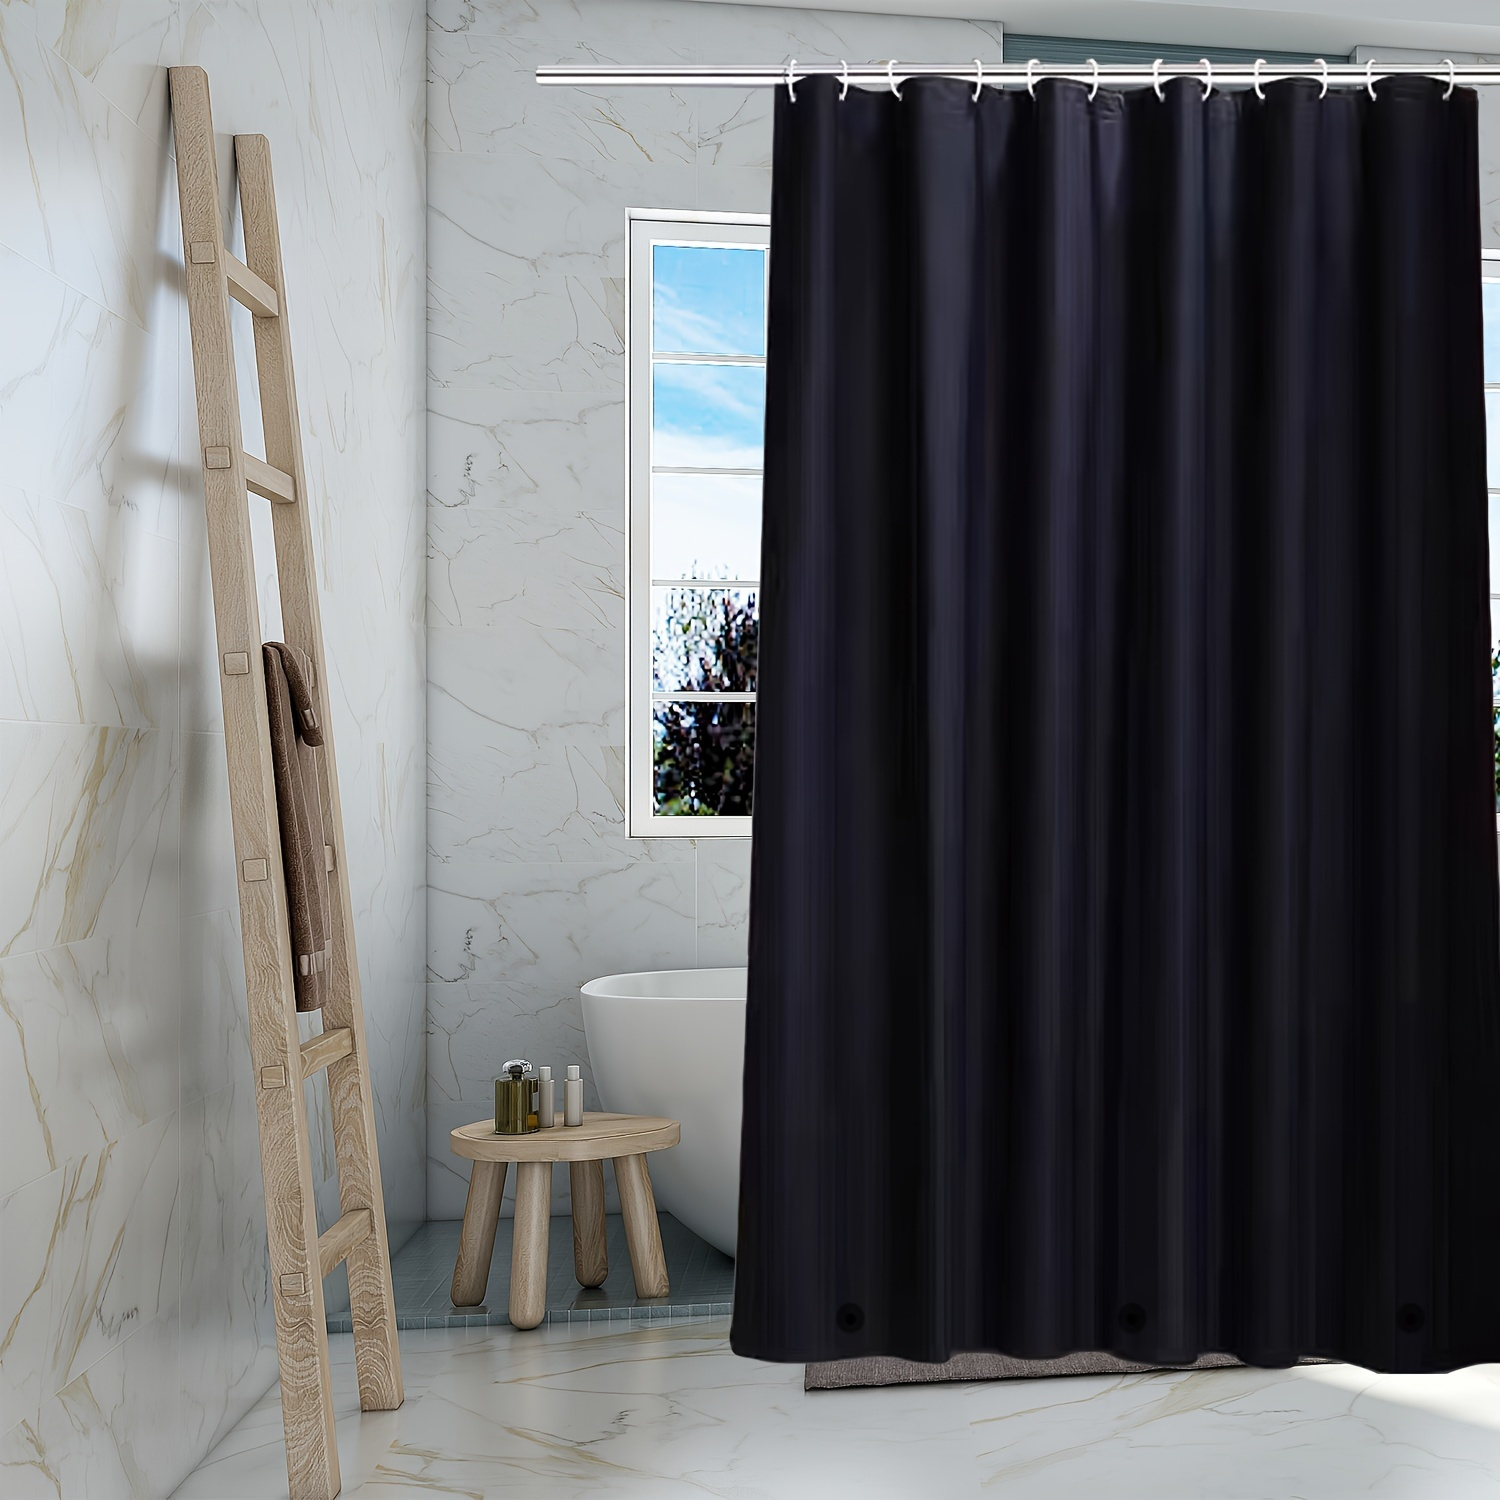 

Black Shower Curtain Lining, Peva Shower Curtain Lining, Plastic Waterproof Shower Curtain, 72x72in, 36x72in, With 3 Magnetic Weights And Loop Holes